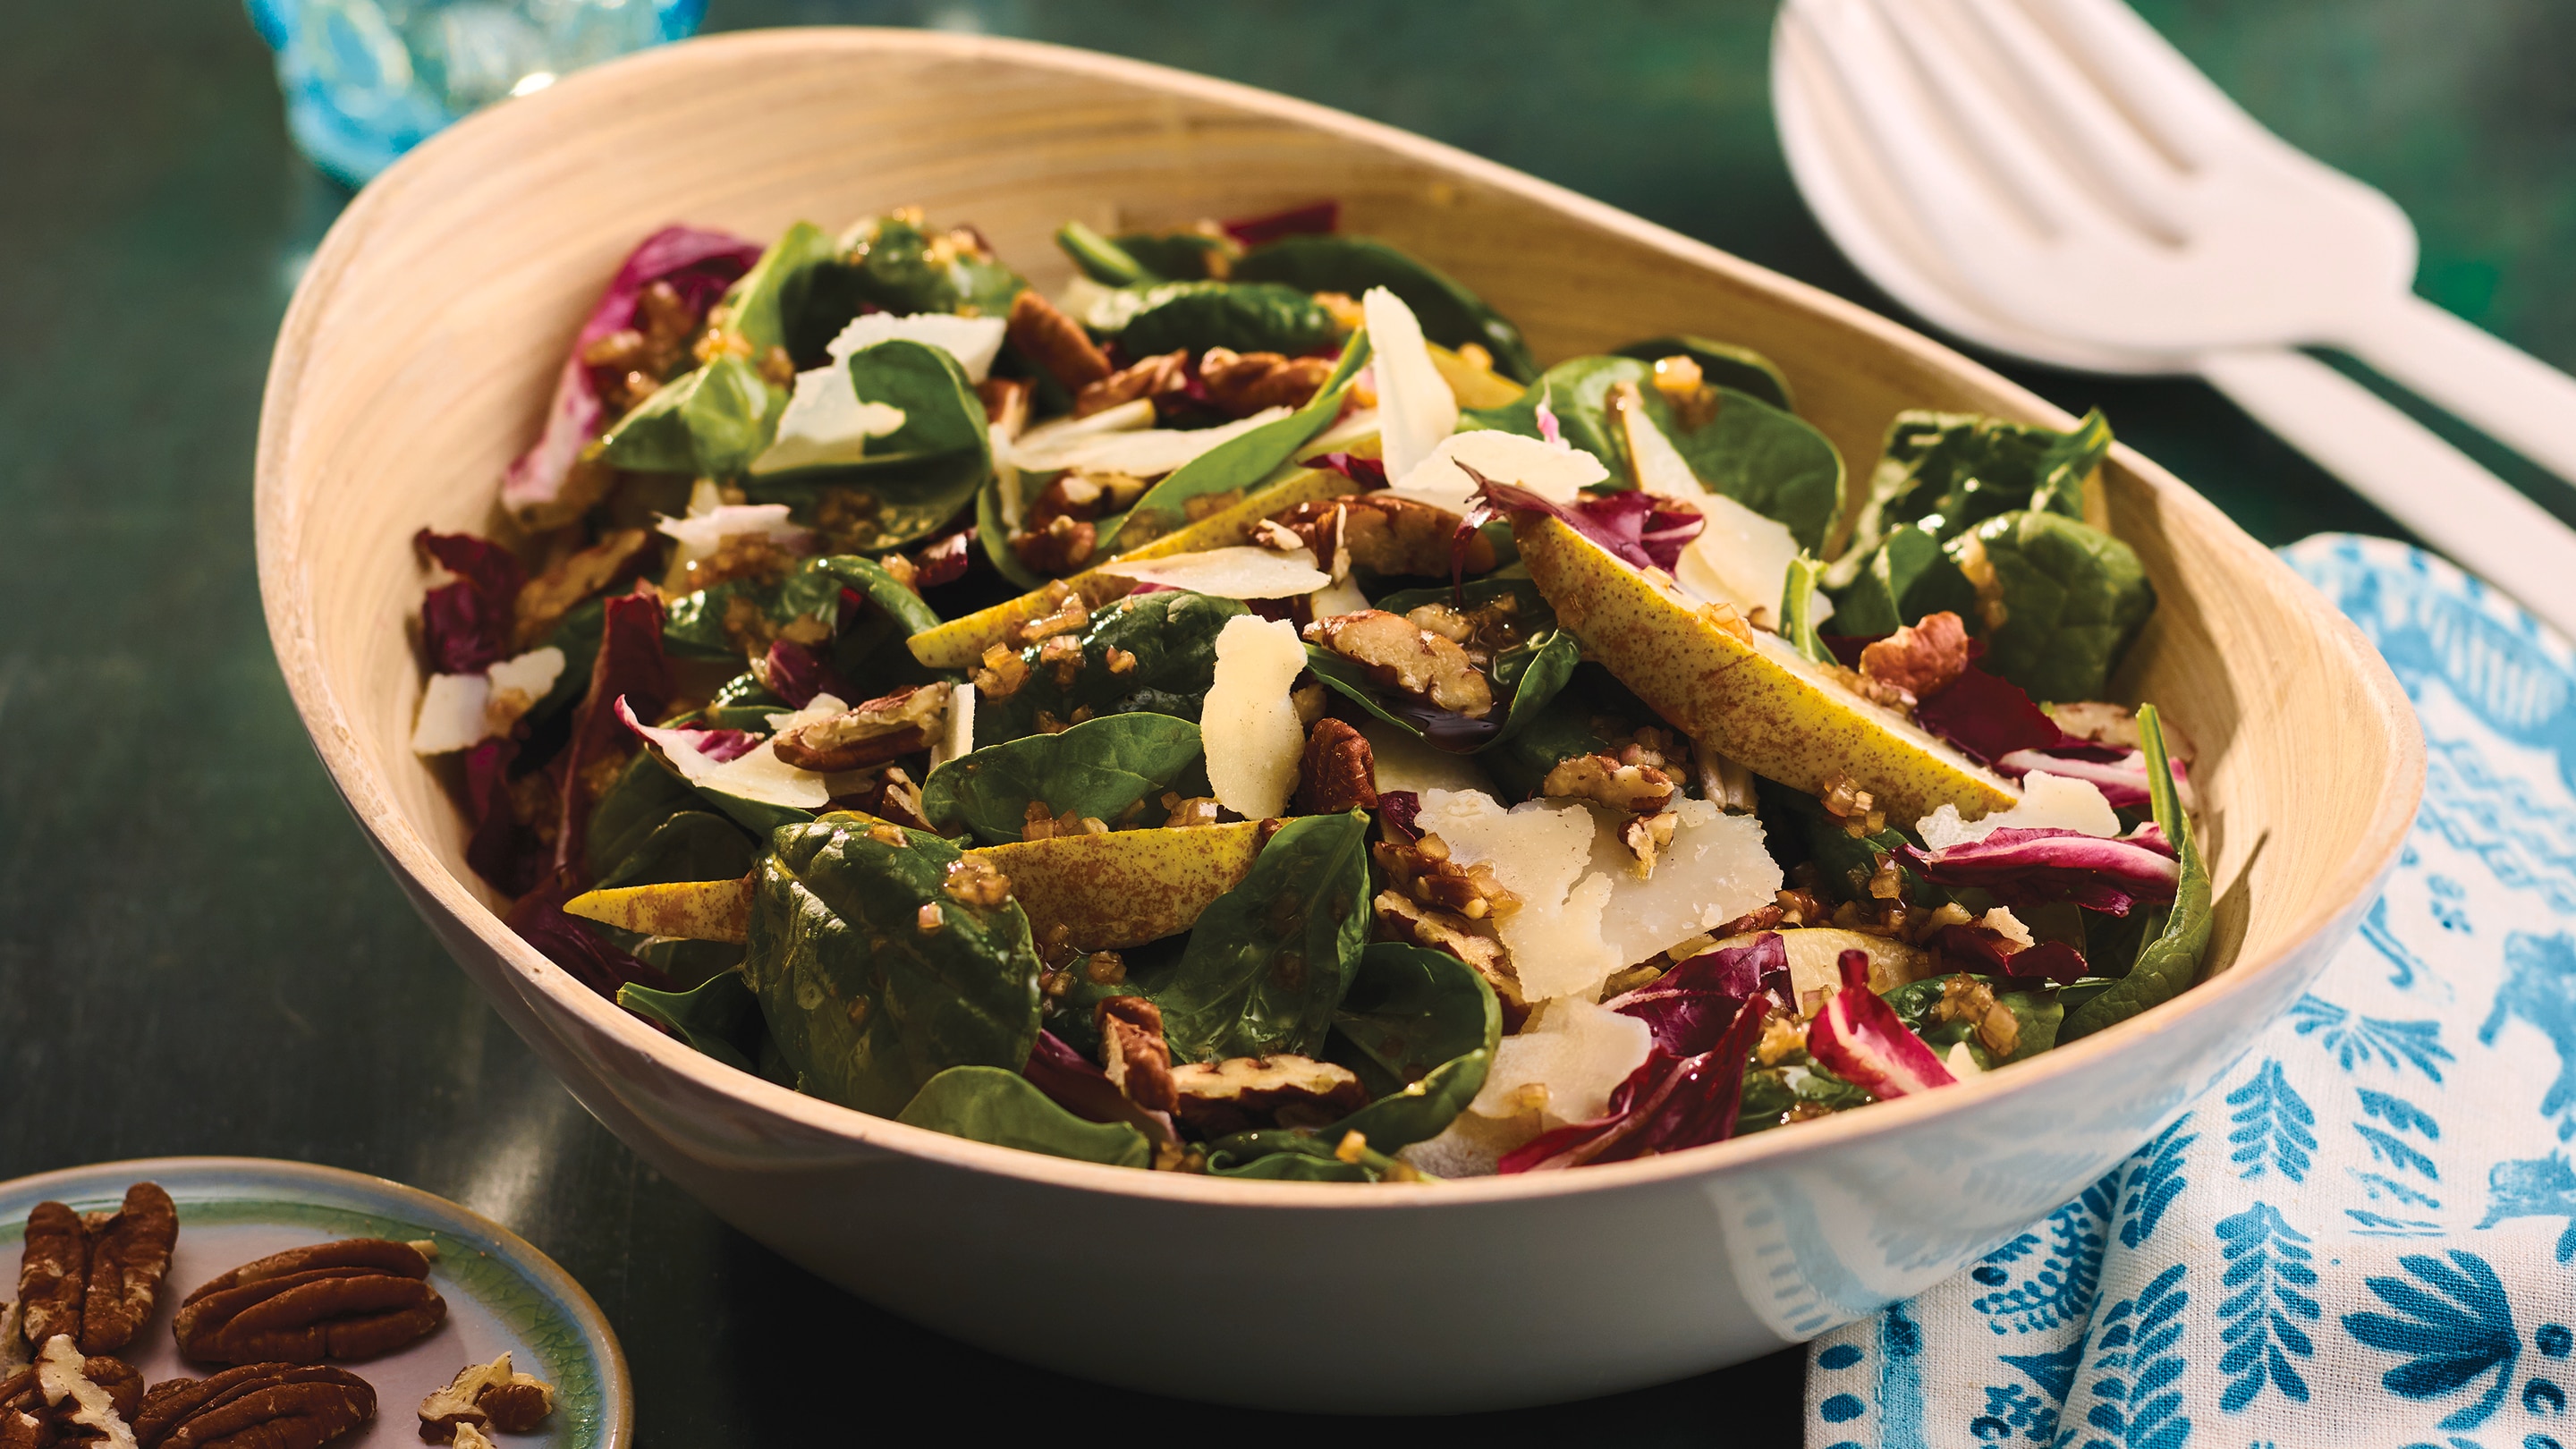 Pear, radicchio and spinach salad sprinkled with pecans